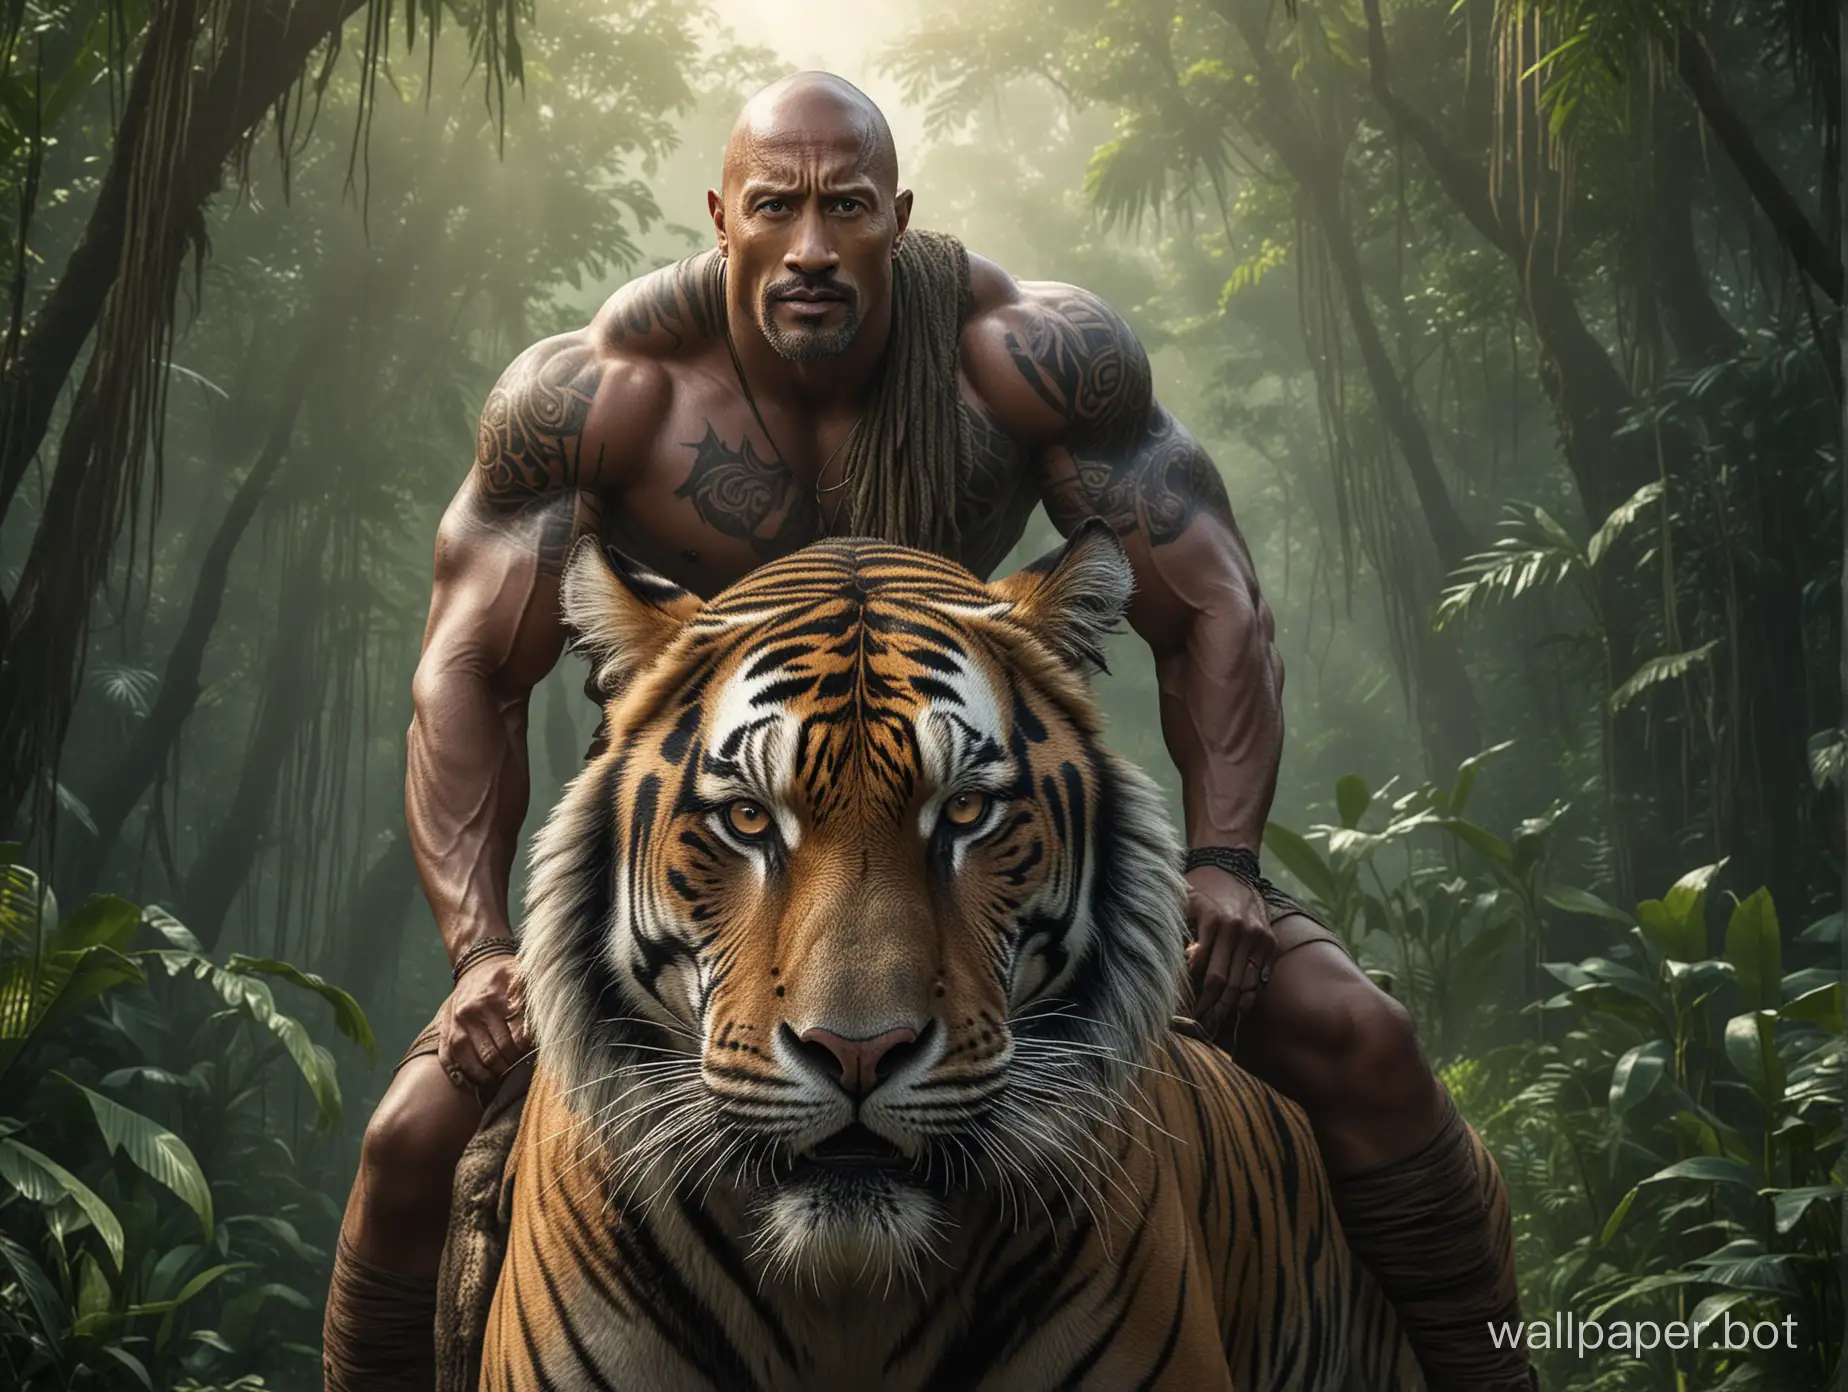 Dwayne Johnson rides a tiger in the Jungle, tarzan, The Rock, tattoos, BREAK studio quality, cinematic photo, intense, dramatic, high contrast, photorealistic, intricate details, professional, 4k, detailed, 8K HDR